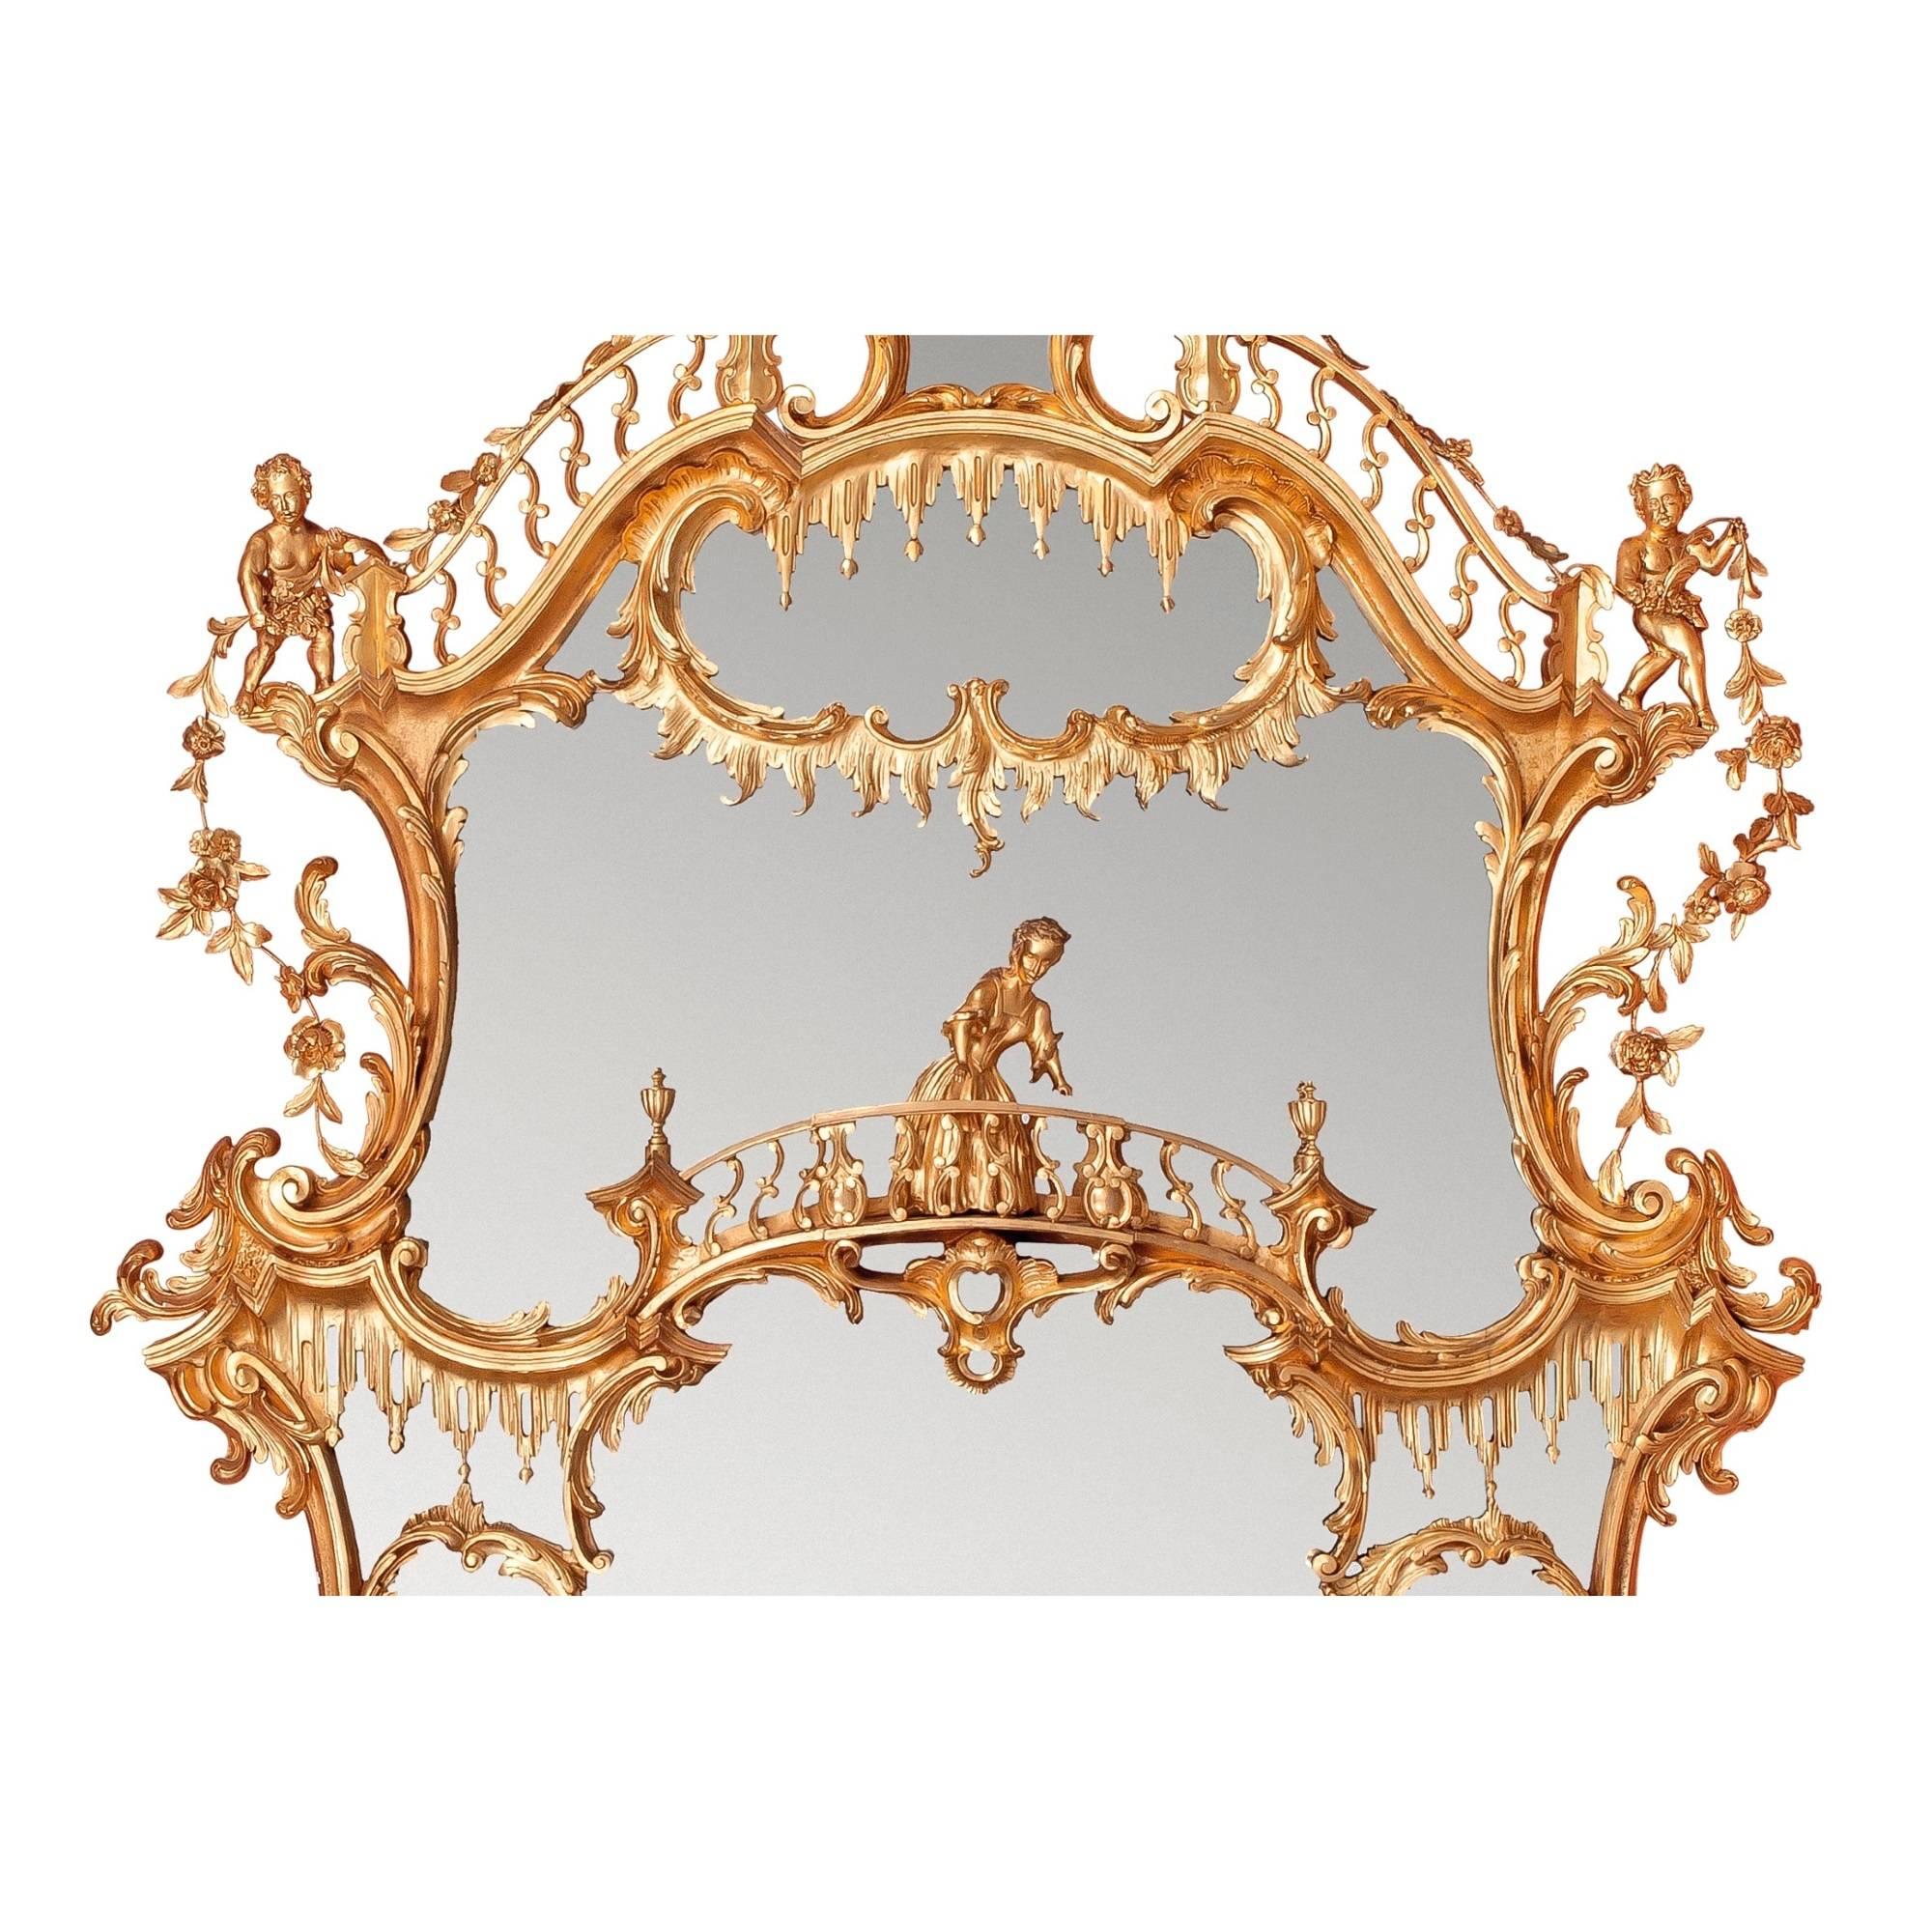 This exceptional over-mantle mirror has a prestigious provenance, having been in the collection of a renowned English aristocratic family. The work is surmounted by a spread eagle bearing rose flower swags in its beak above an arched galleried